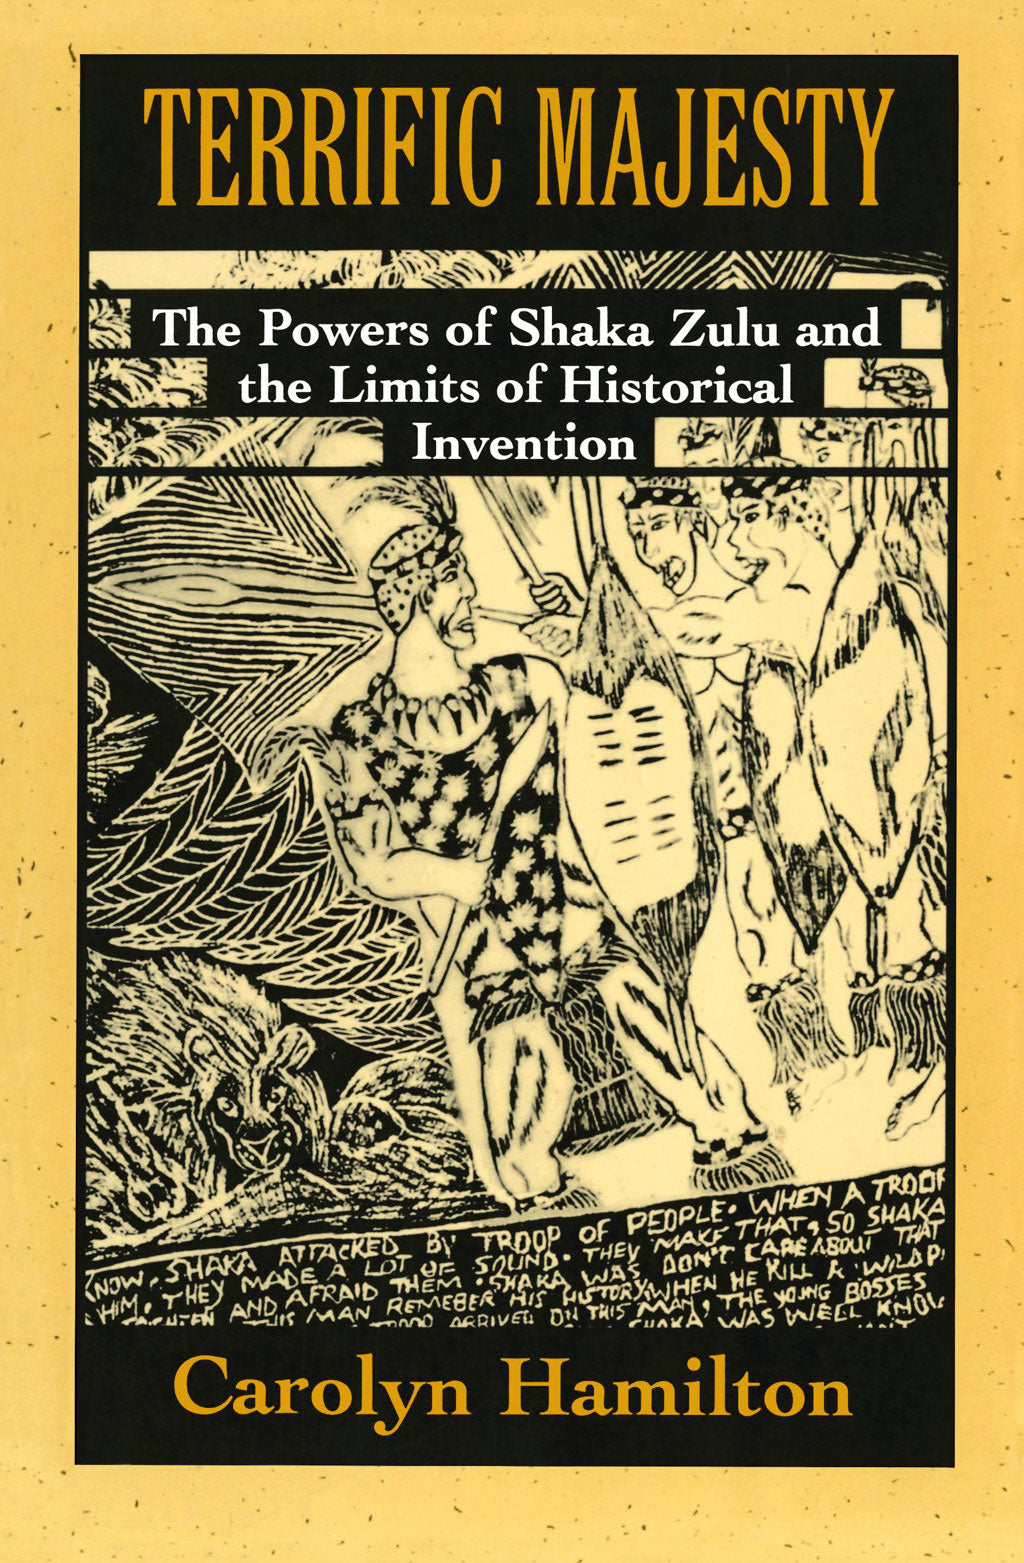 TERRIFIC MAJESTY: The Powers of Shaka Zulu and the Limits of Historical Invention